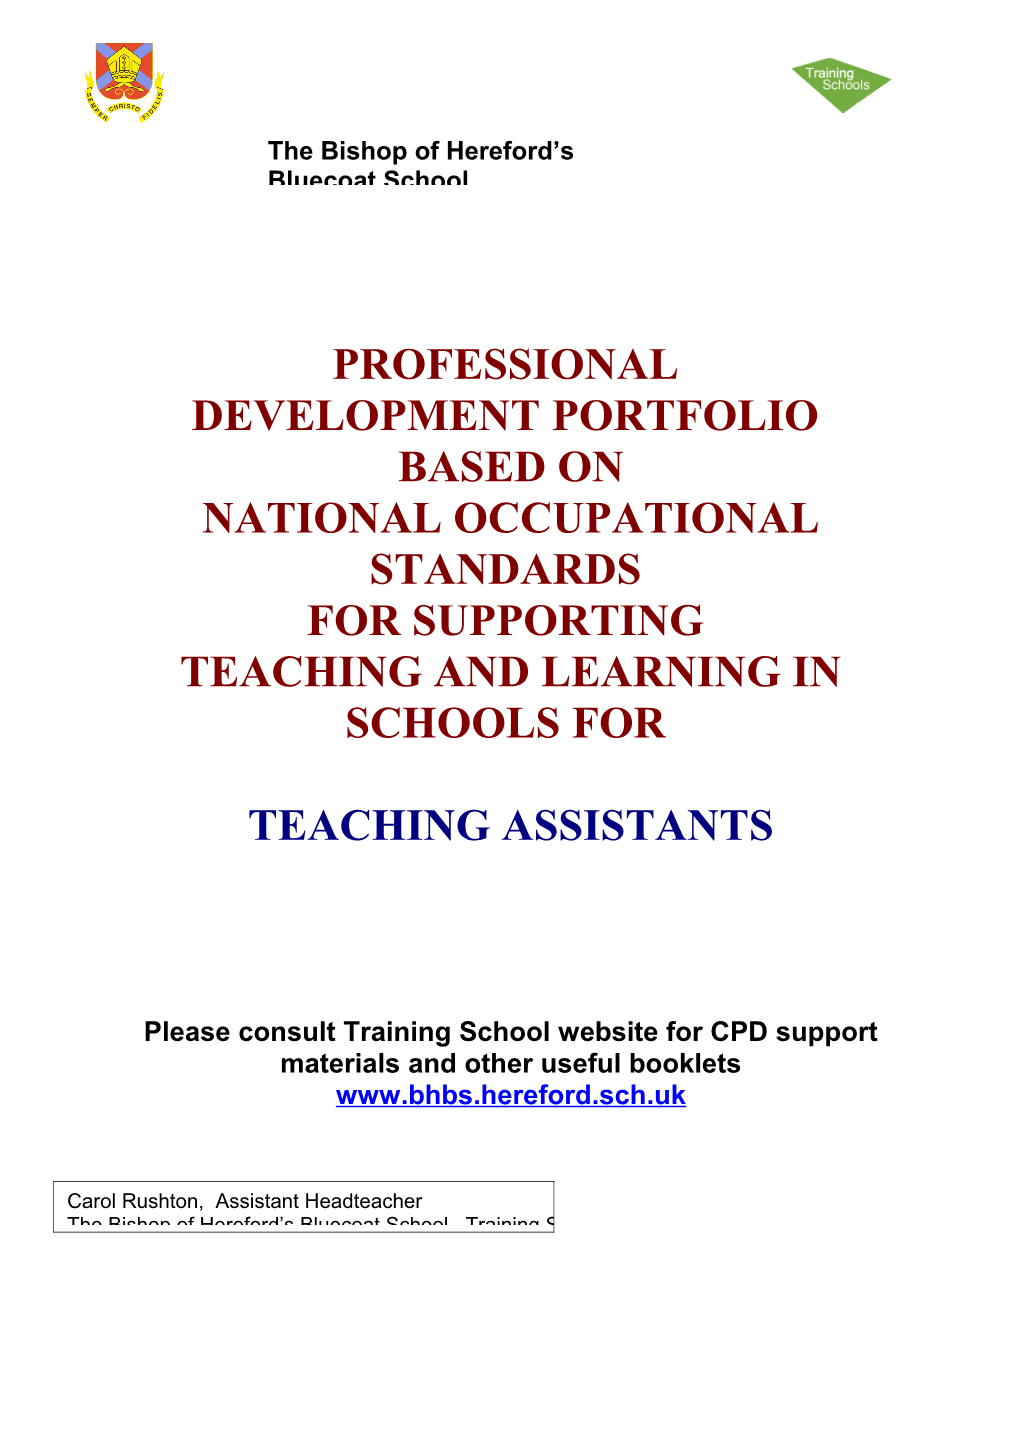 Teaching Assistants PDP